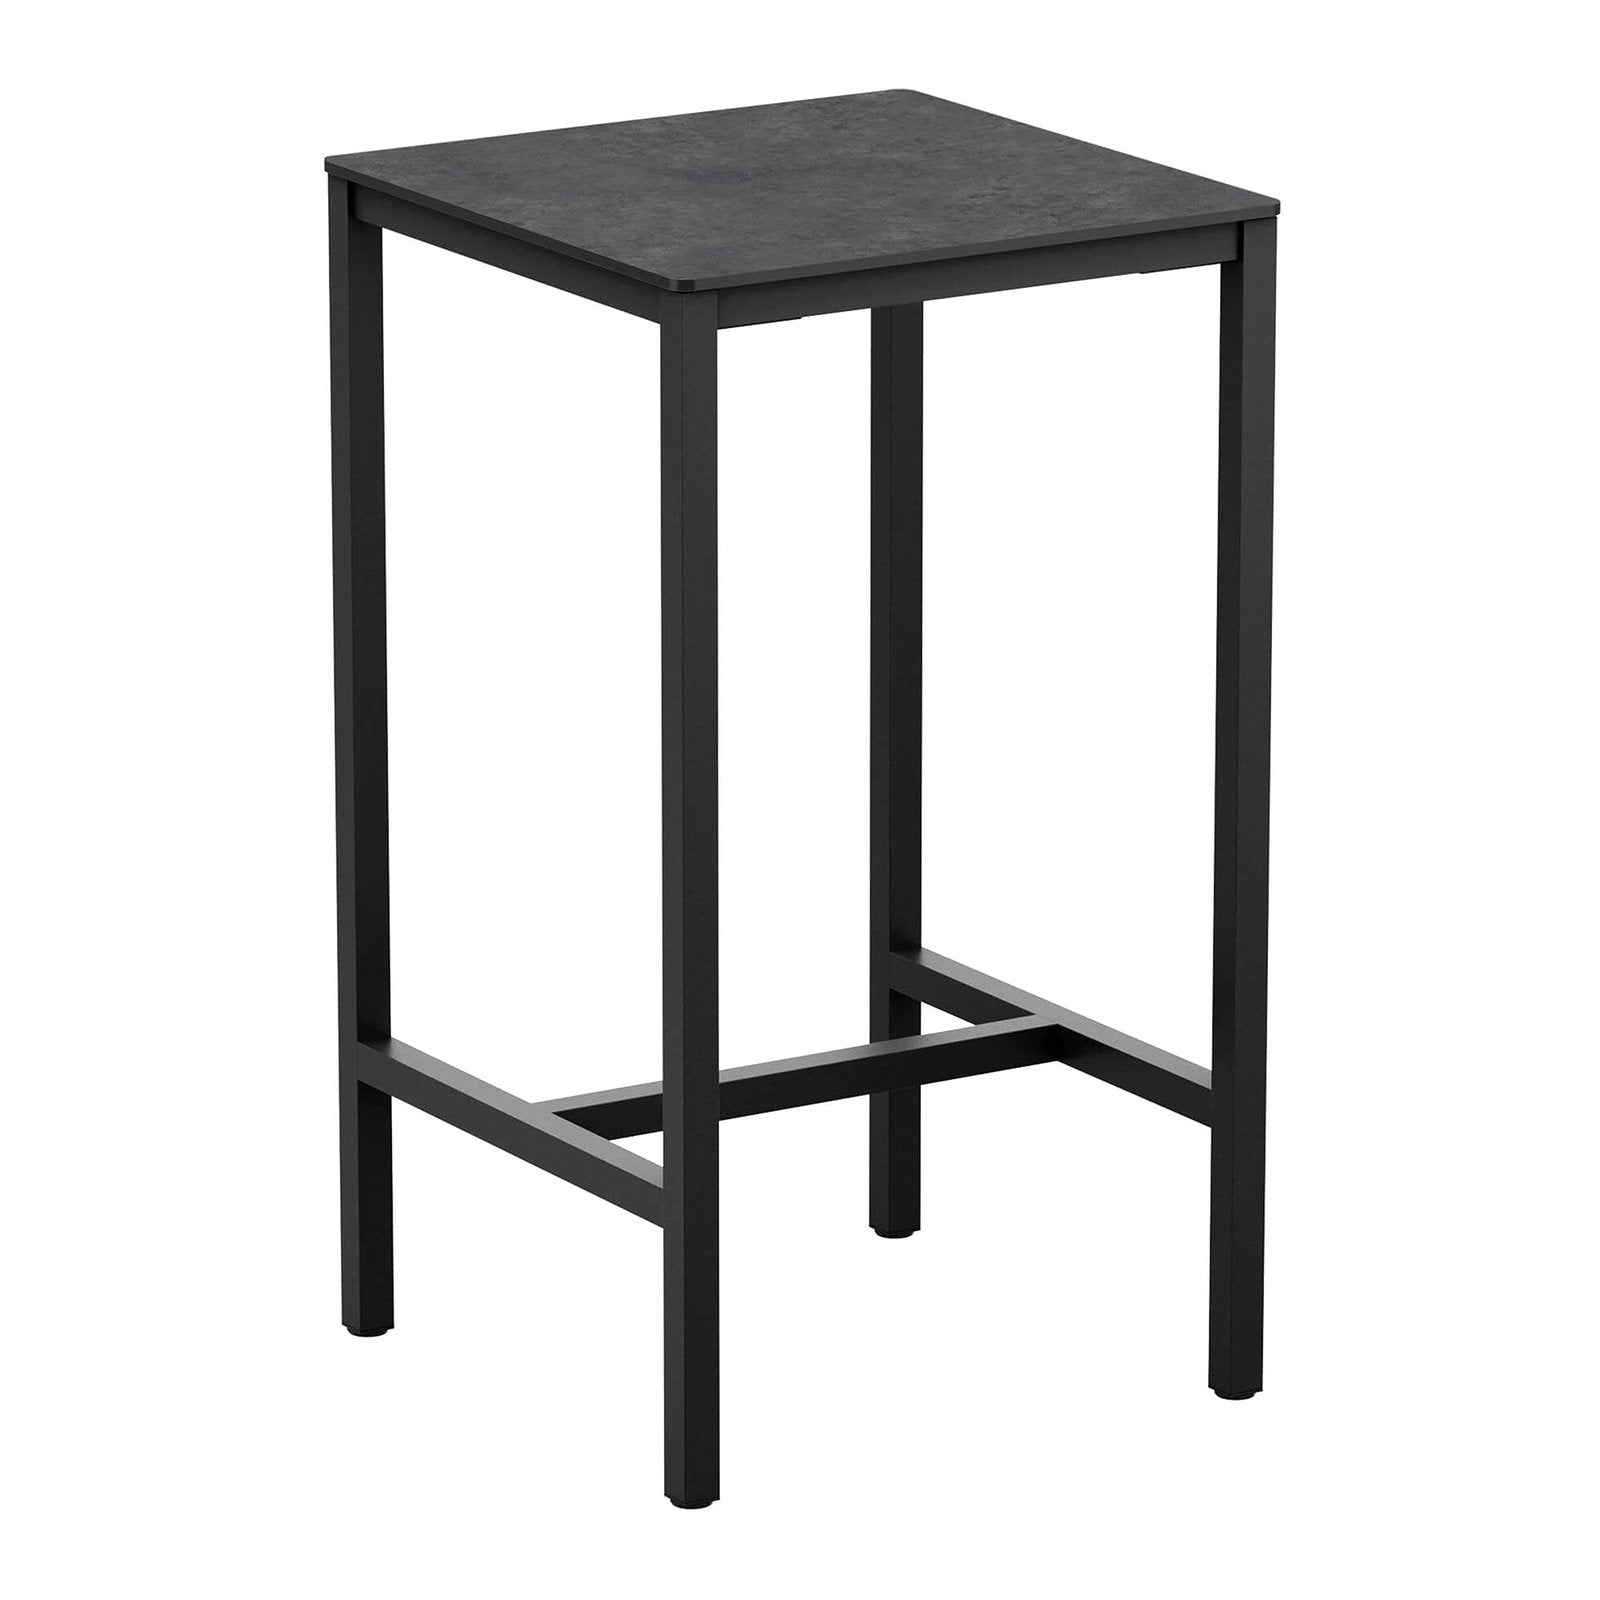 Single Breakout High Table - Office Products Online